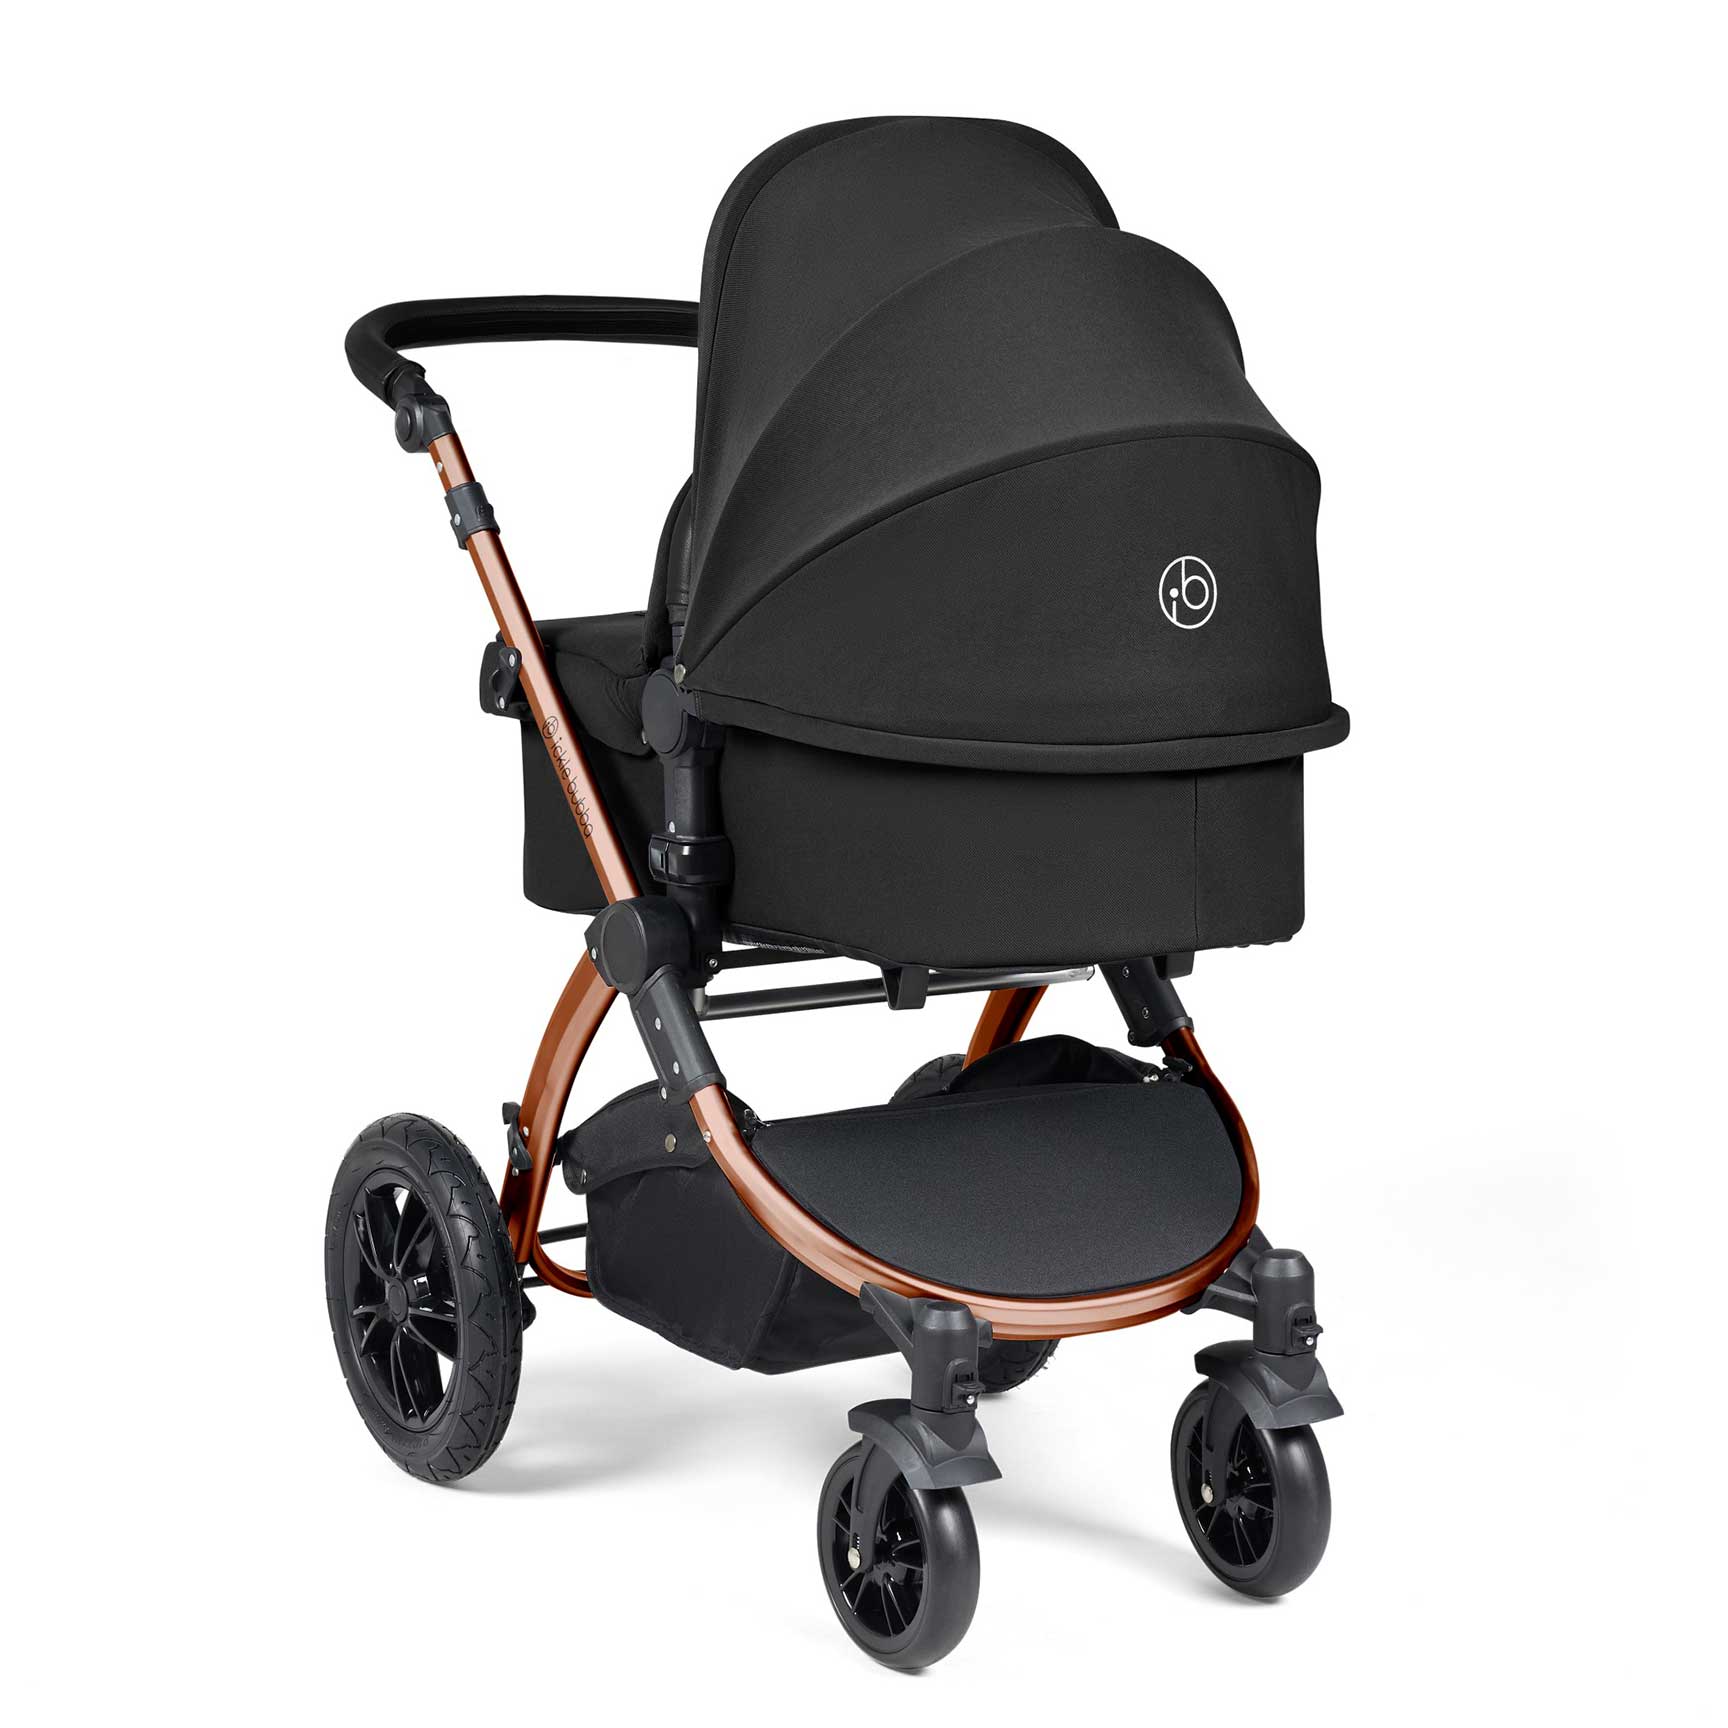 Ickle Bubba Stomp Luxe All-in-One Travel System with Isofix Base in Bronze/Midnight/Black Travel Systems 10-011-300-139 5056515026610